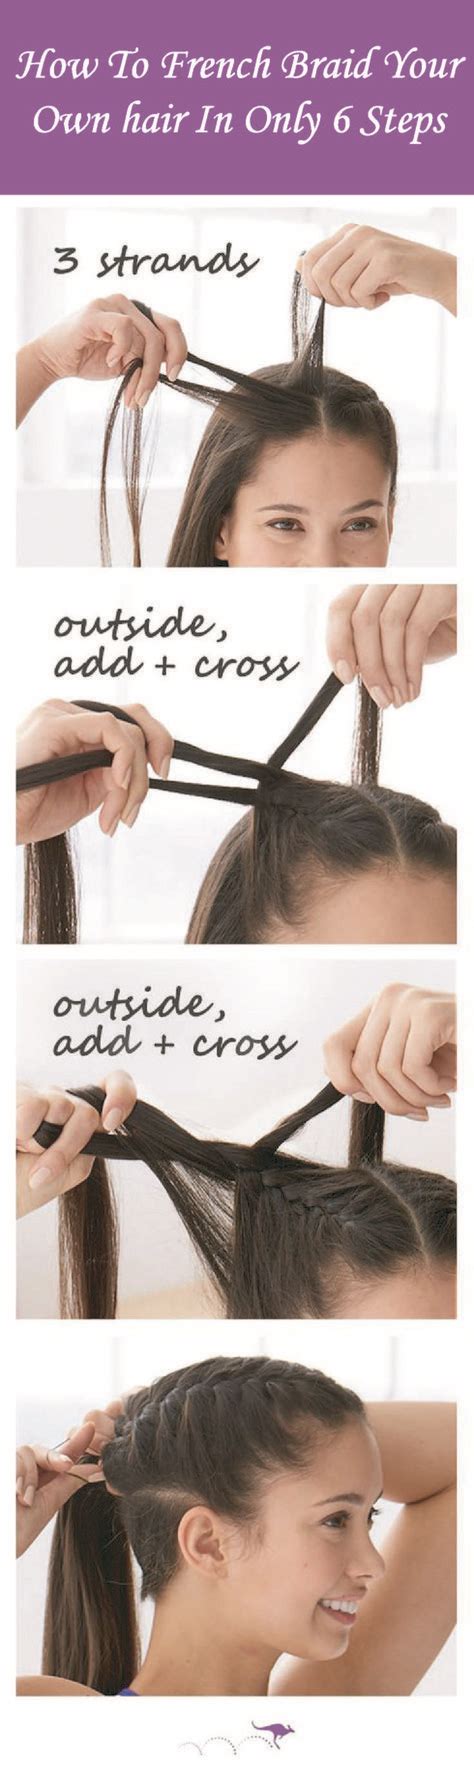 How to double french braid your own short hair. Hair layered selena gomez 47 Ideas for 2019 | Braiding your own hair, French braid short hair ...